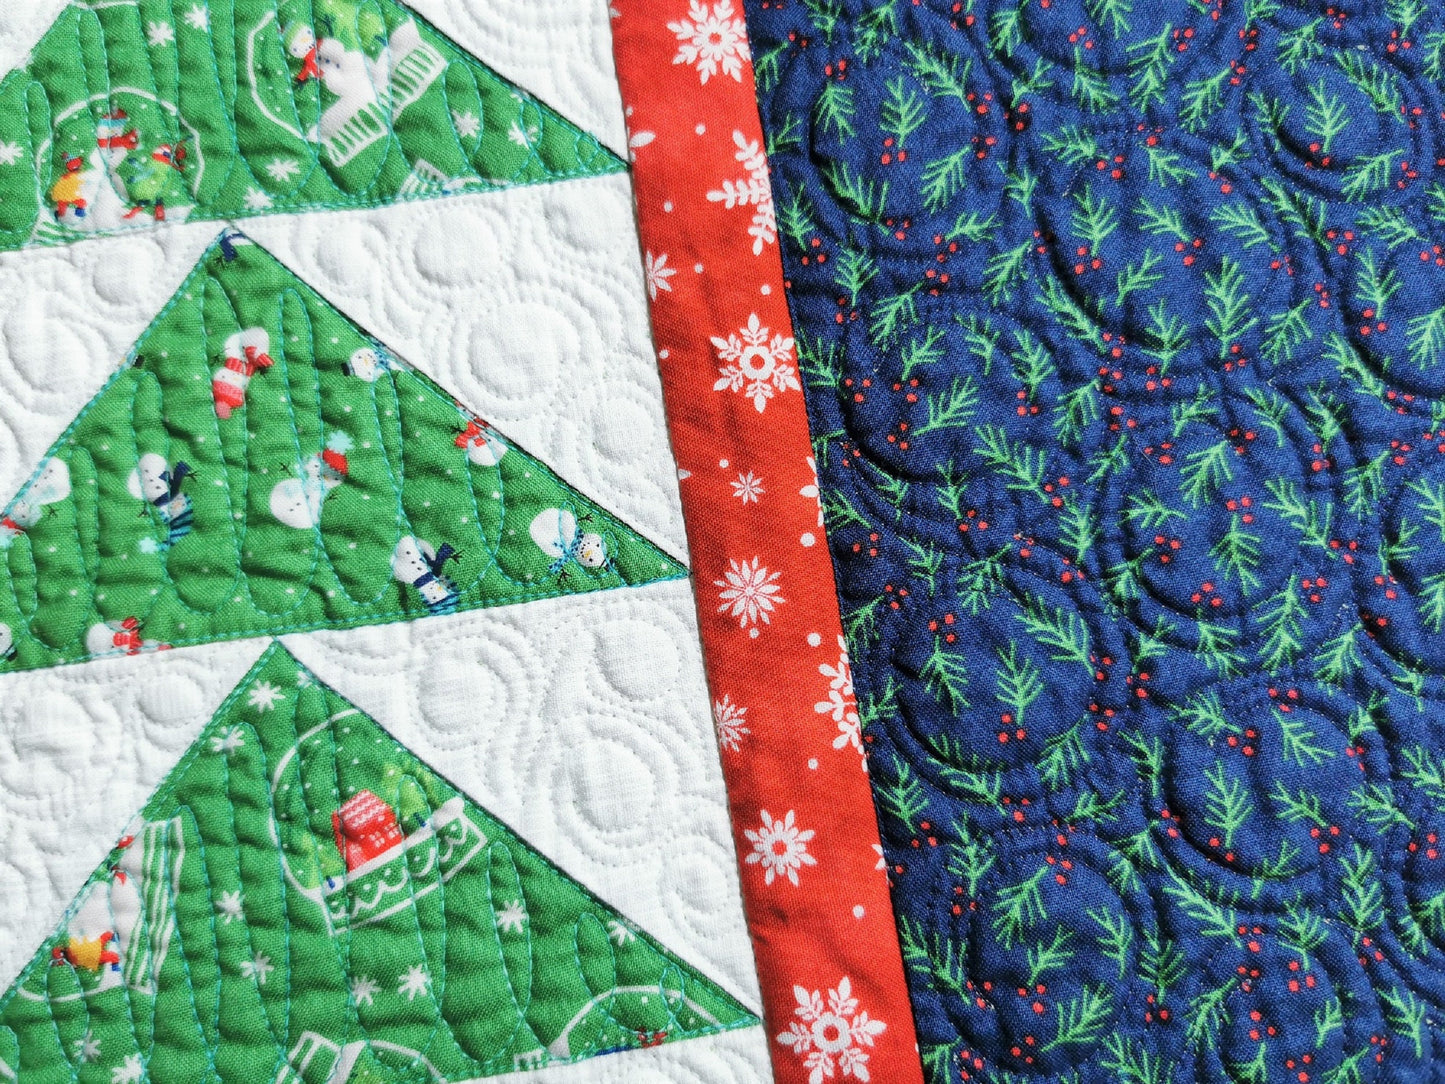 Four Quilted Christmas Tree Placemats, Reversible Winter Theme Table Mats